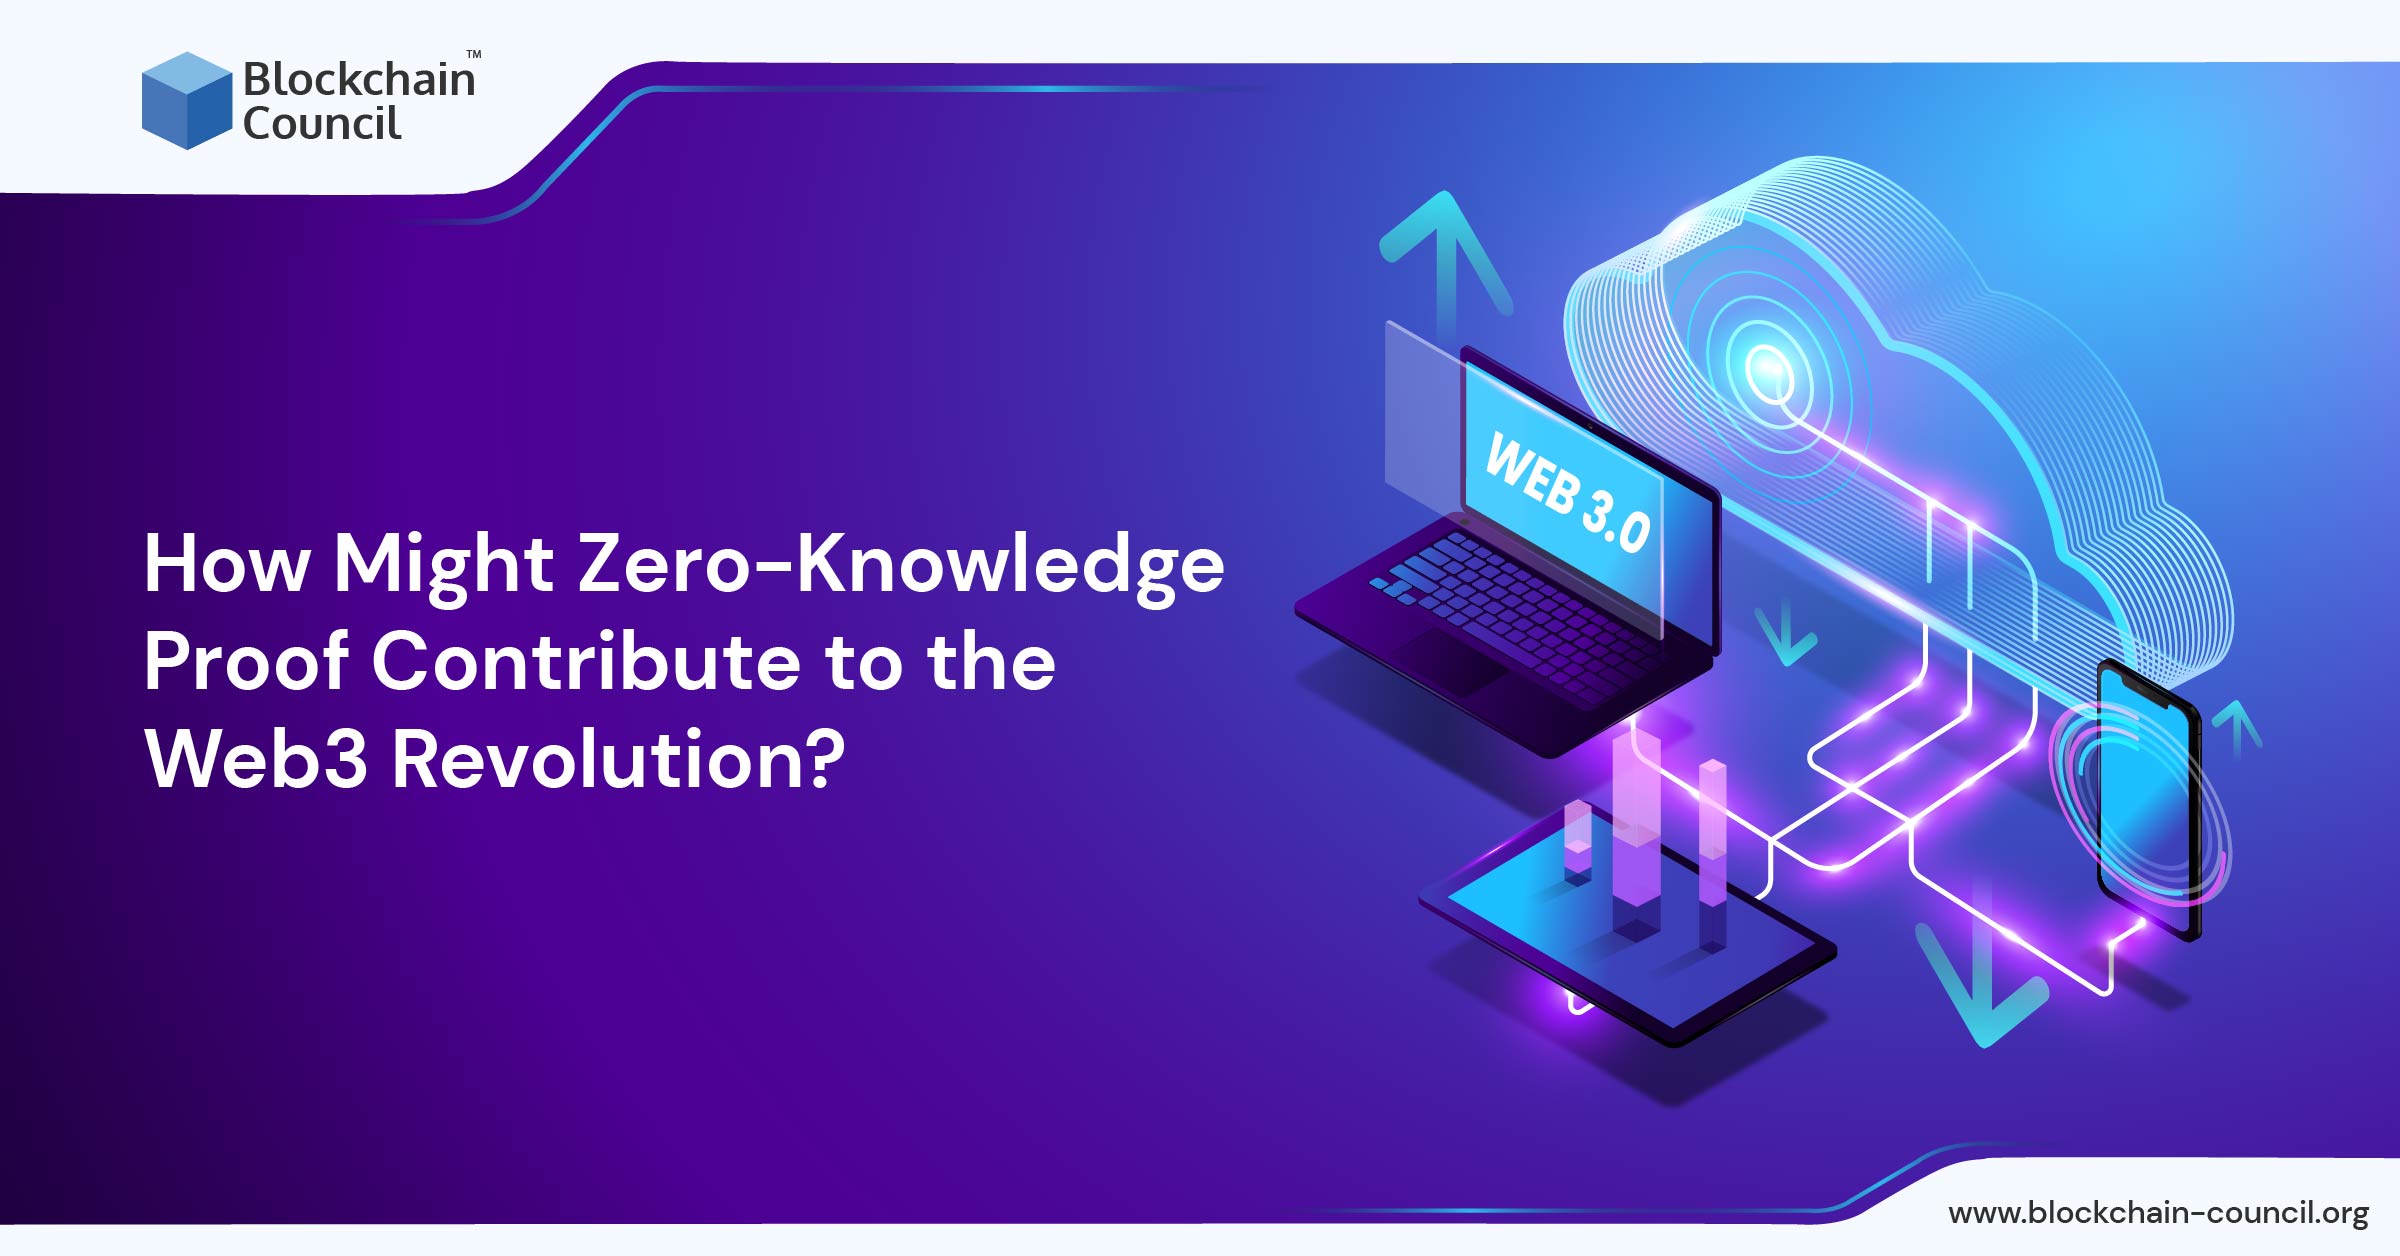 How Might Zero-Knowledge Proof Contribute to the Web3 Revolution